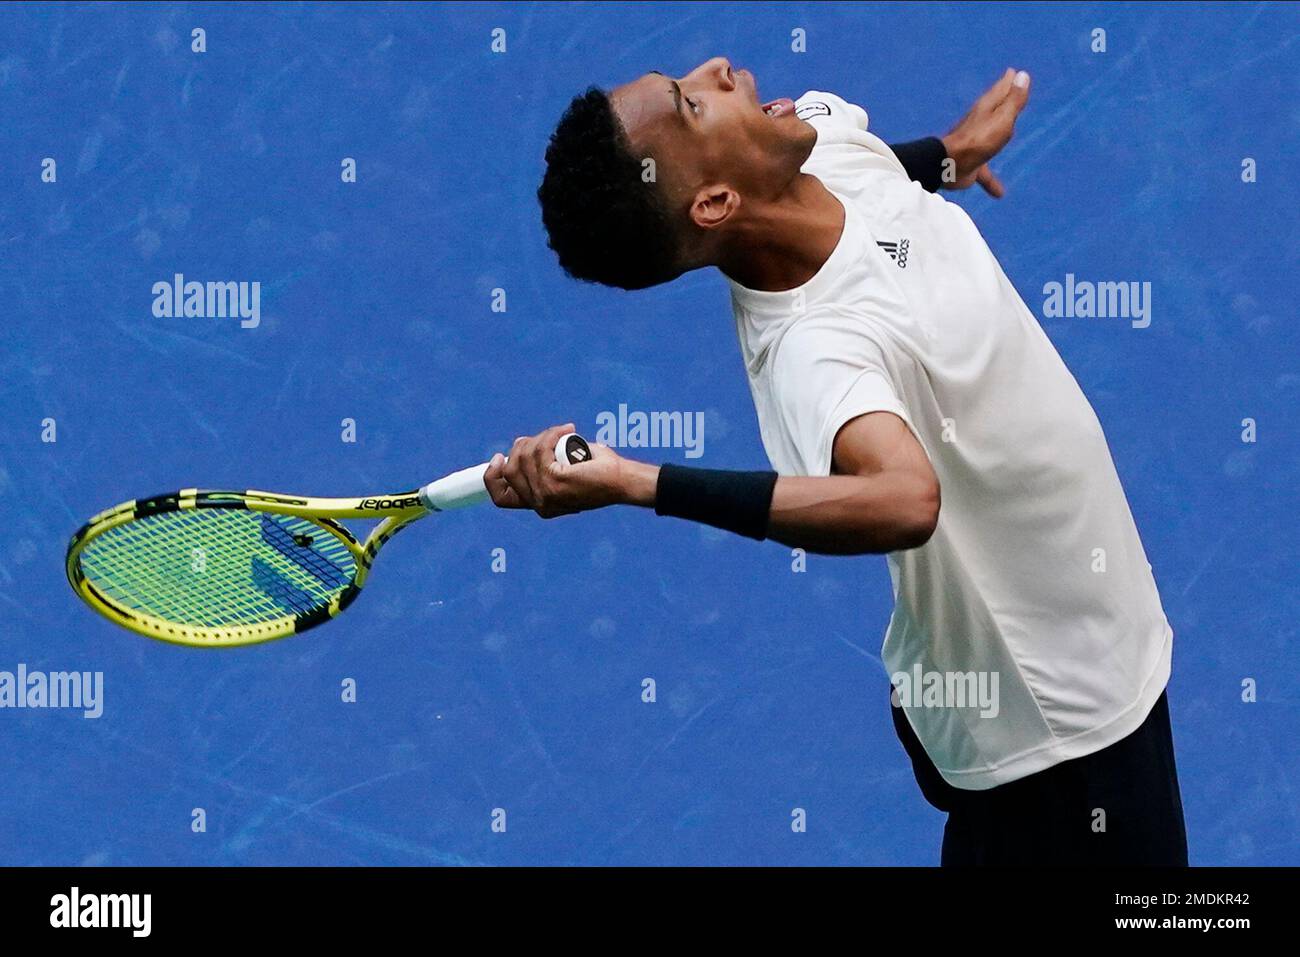 Felix Auger-Aliassime, of Canada, serves to Daniil Medvedev, of Russia, during the semifinals of the US Open tennis championships, Friday, Sept